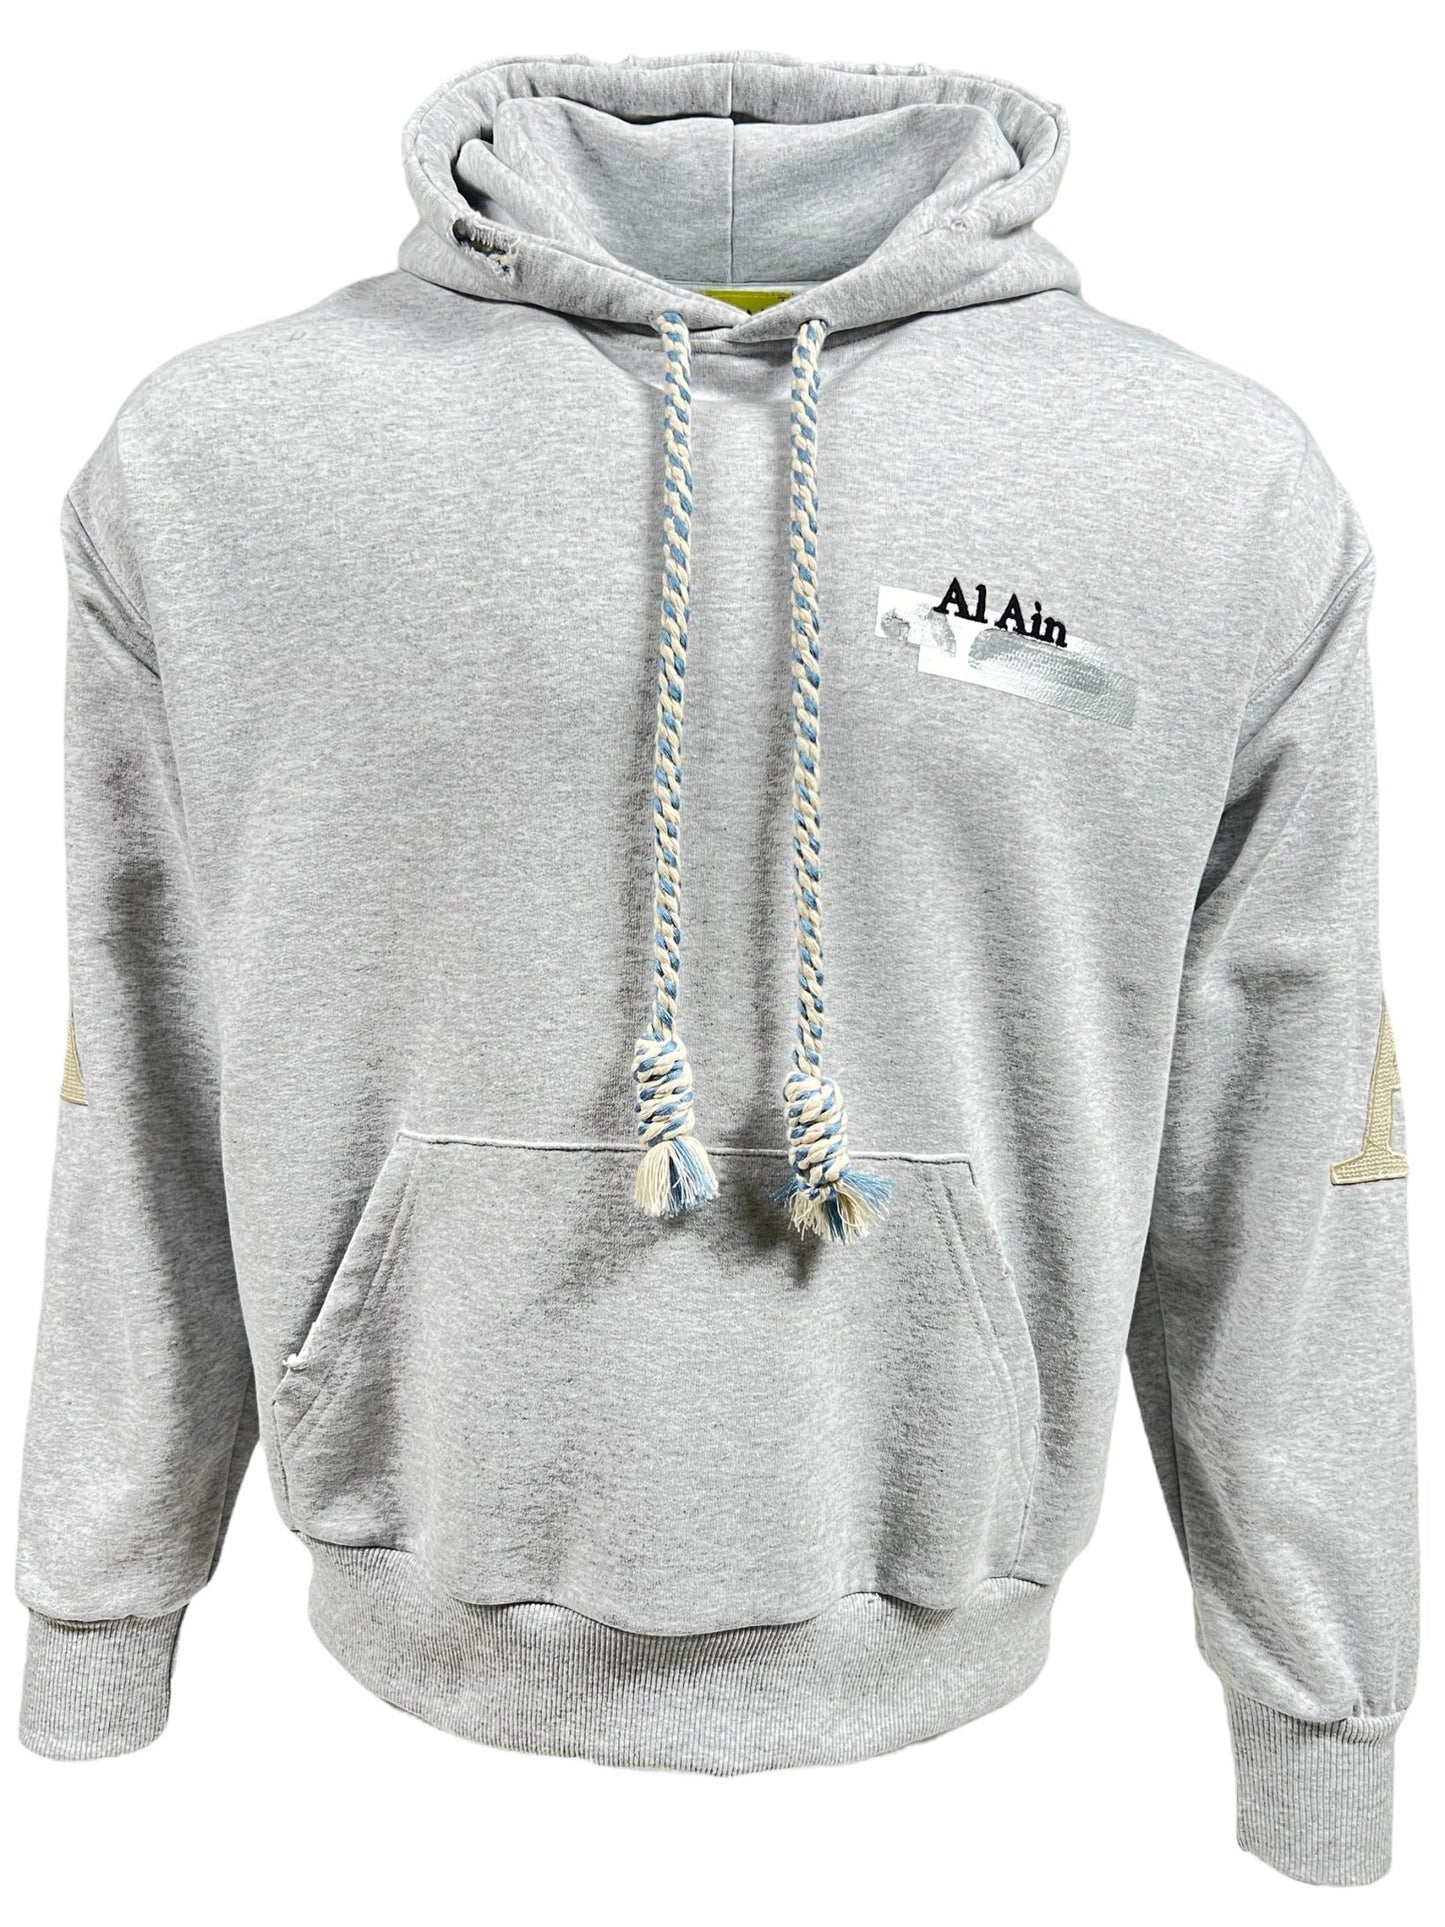 A grey AL AIN AHOX S150 YACHT LIMITED hoodie, made from 100% cotton, features a front pocket and drawstrings. The text "Al Ain" is stylishly displayed on the left side of the chest, making it a must-have piece for streetwear enthusiasts.